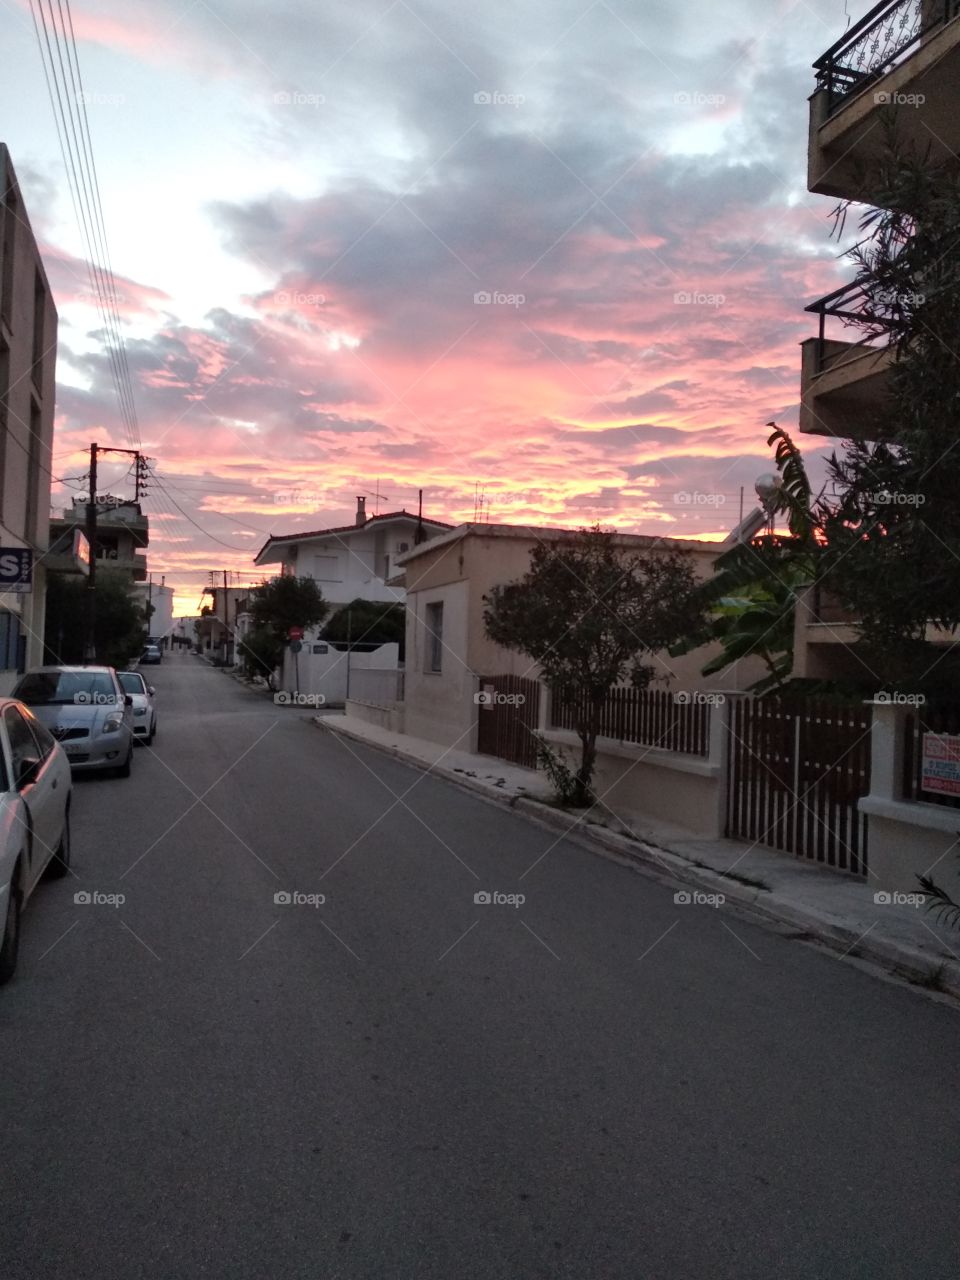 This is a photo i ve captured while taking a walk with my girlfriend in a place we love in Greece in an awesome view with sunset's beautiful colors up in the sky!!